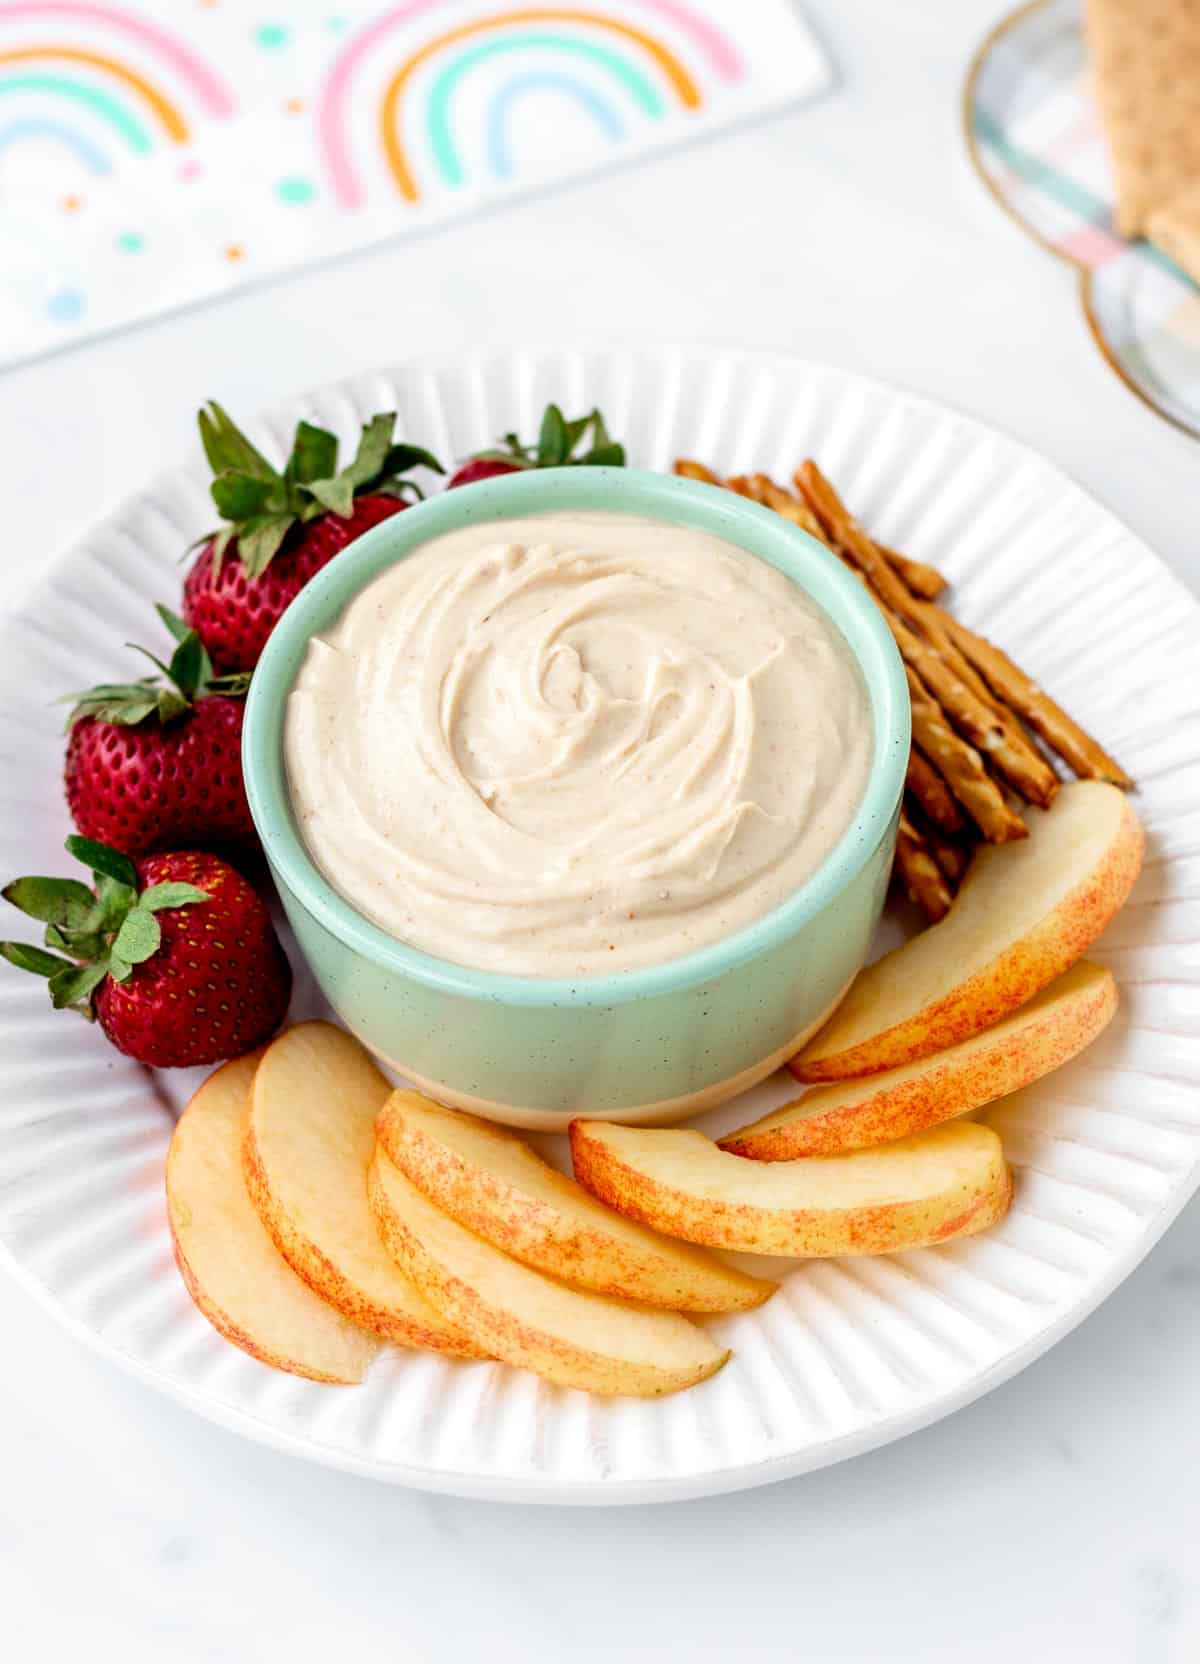 A small bowl of peanut butter fruit dip on a plate with fruit and pretzels.